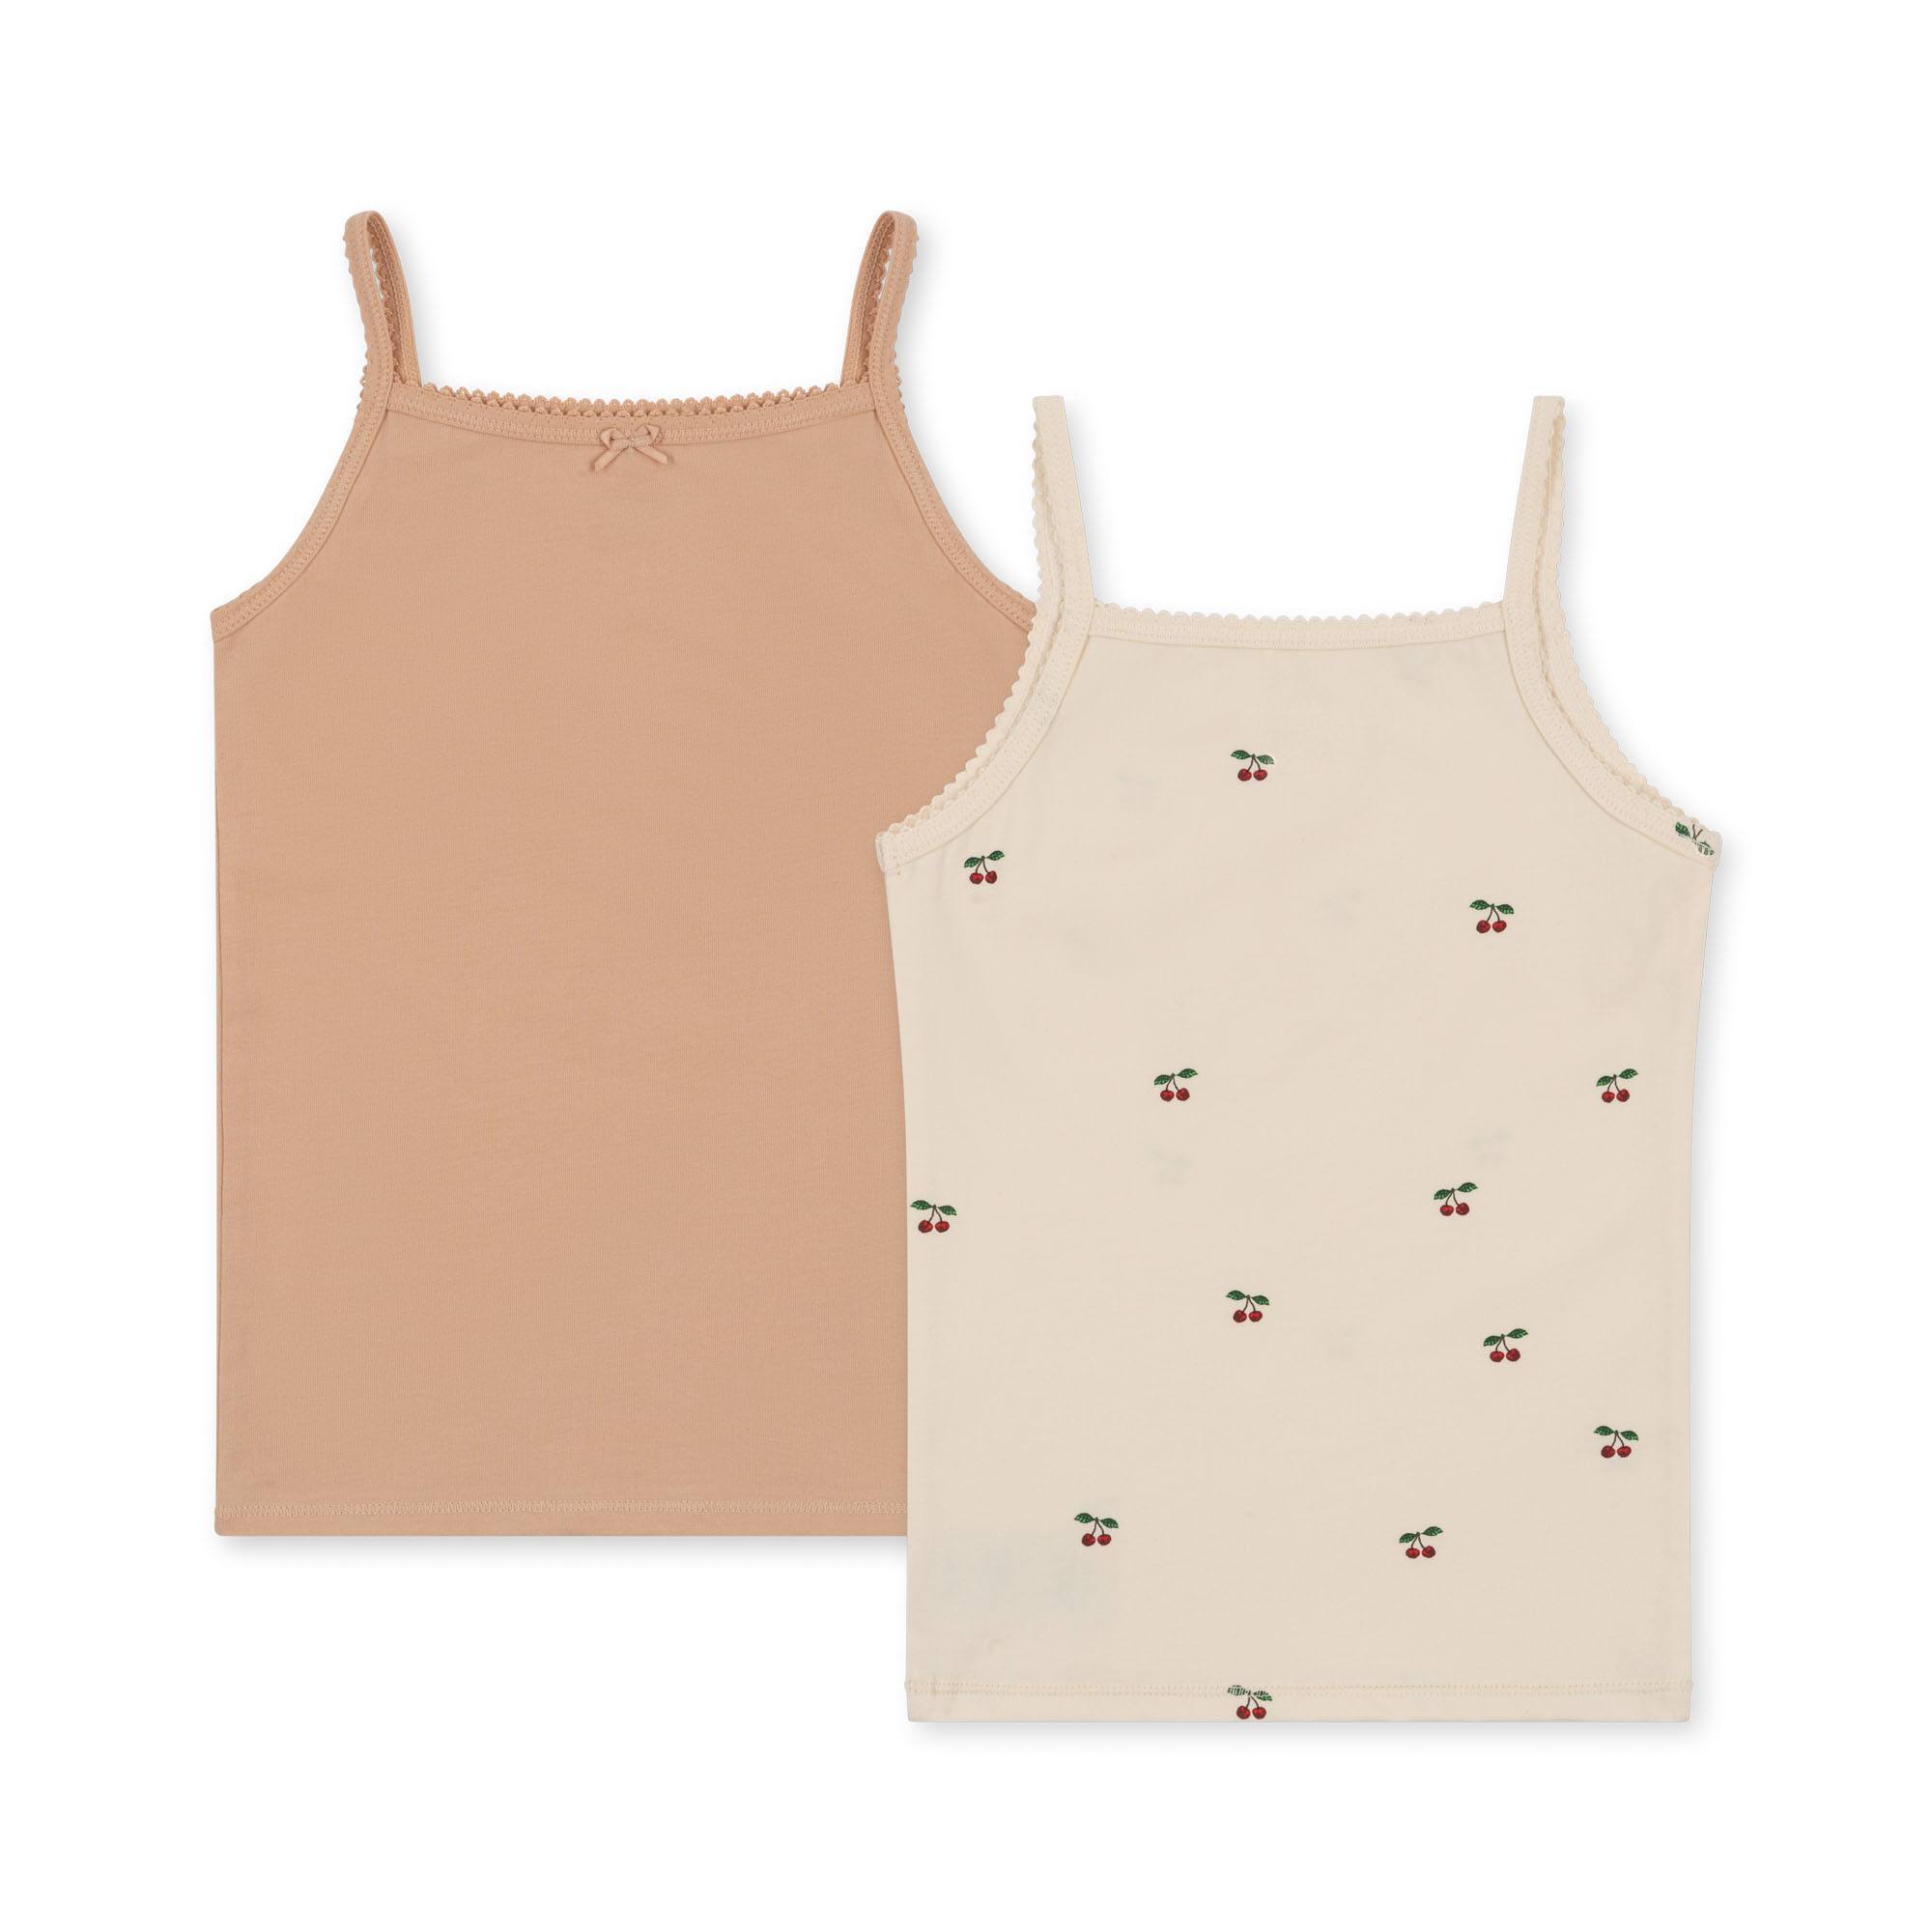 KS4637 - BASIC 2 PACK STRAP TOP GOTS - CHERRY- TOASTED ALMOND - Main